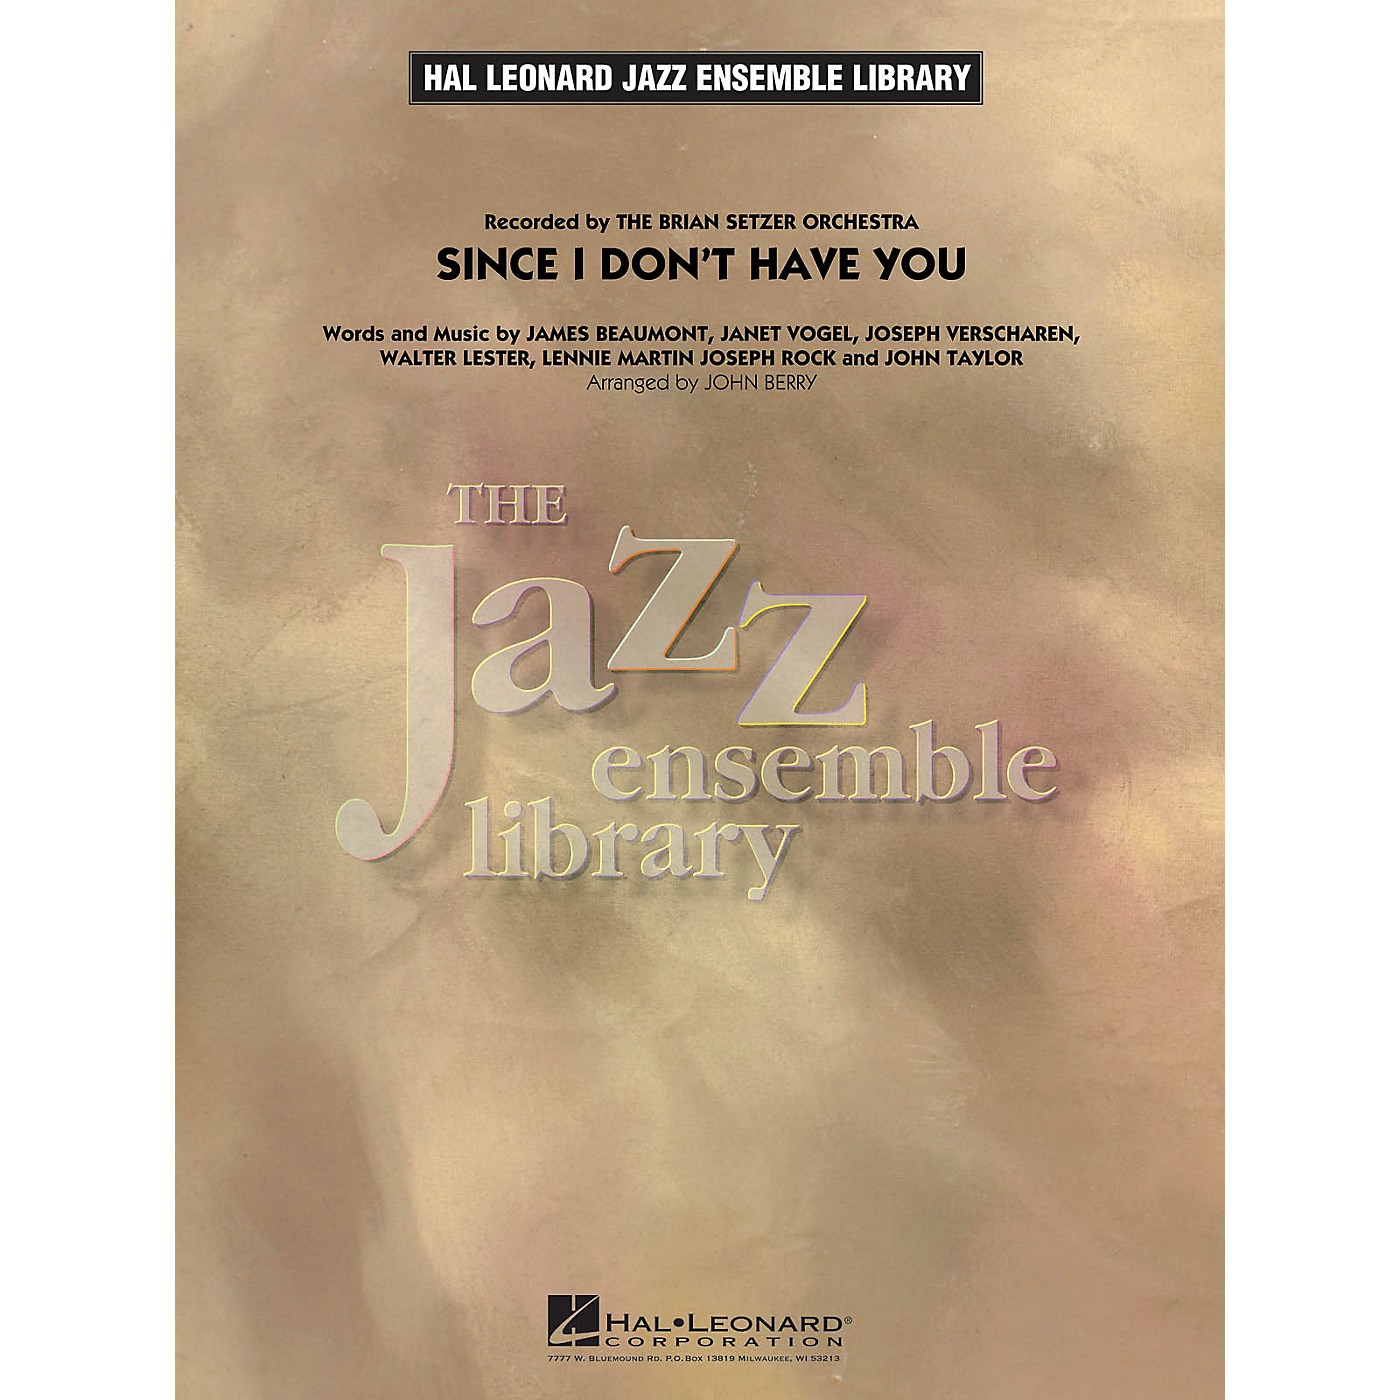 Hal Leonard Since I Don't Have You Jazz Band Level 4 Arranged by John Berry thumbnail